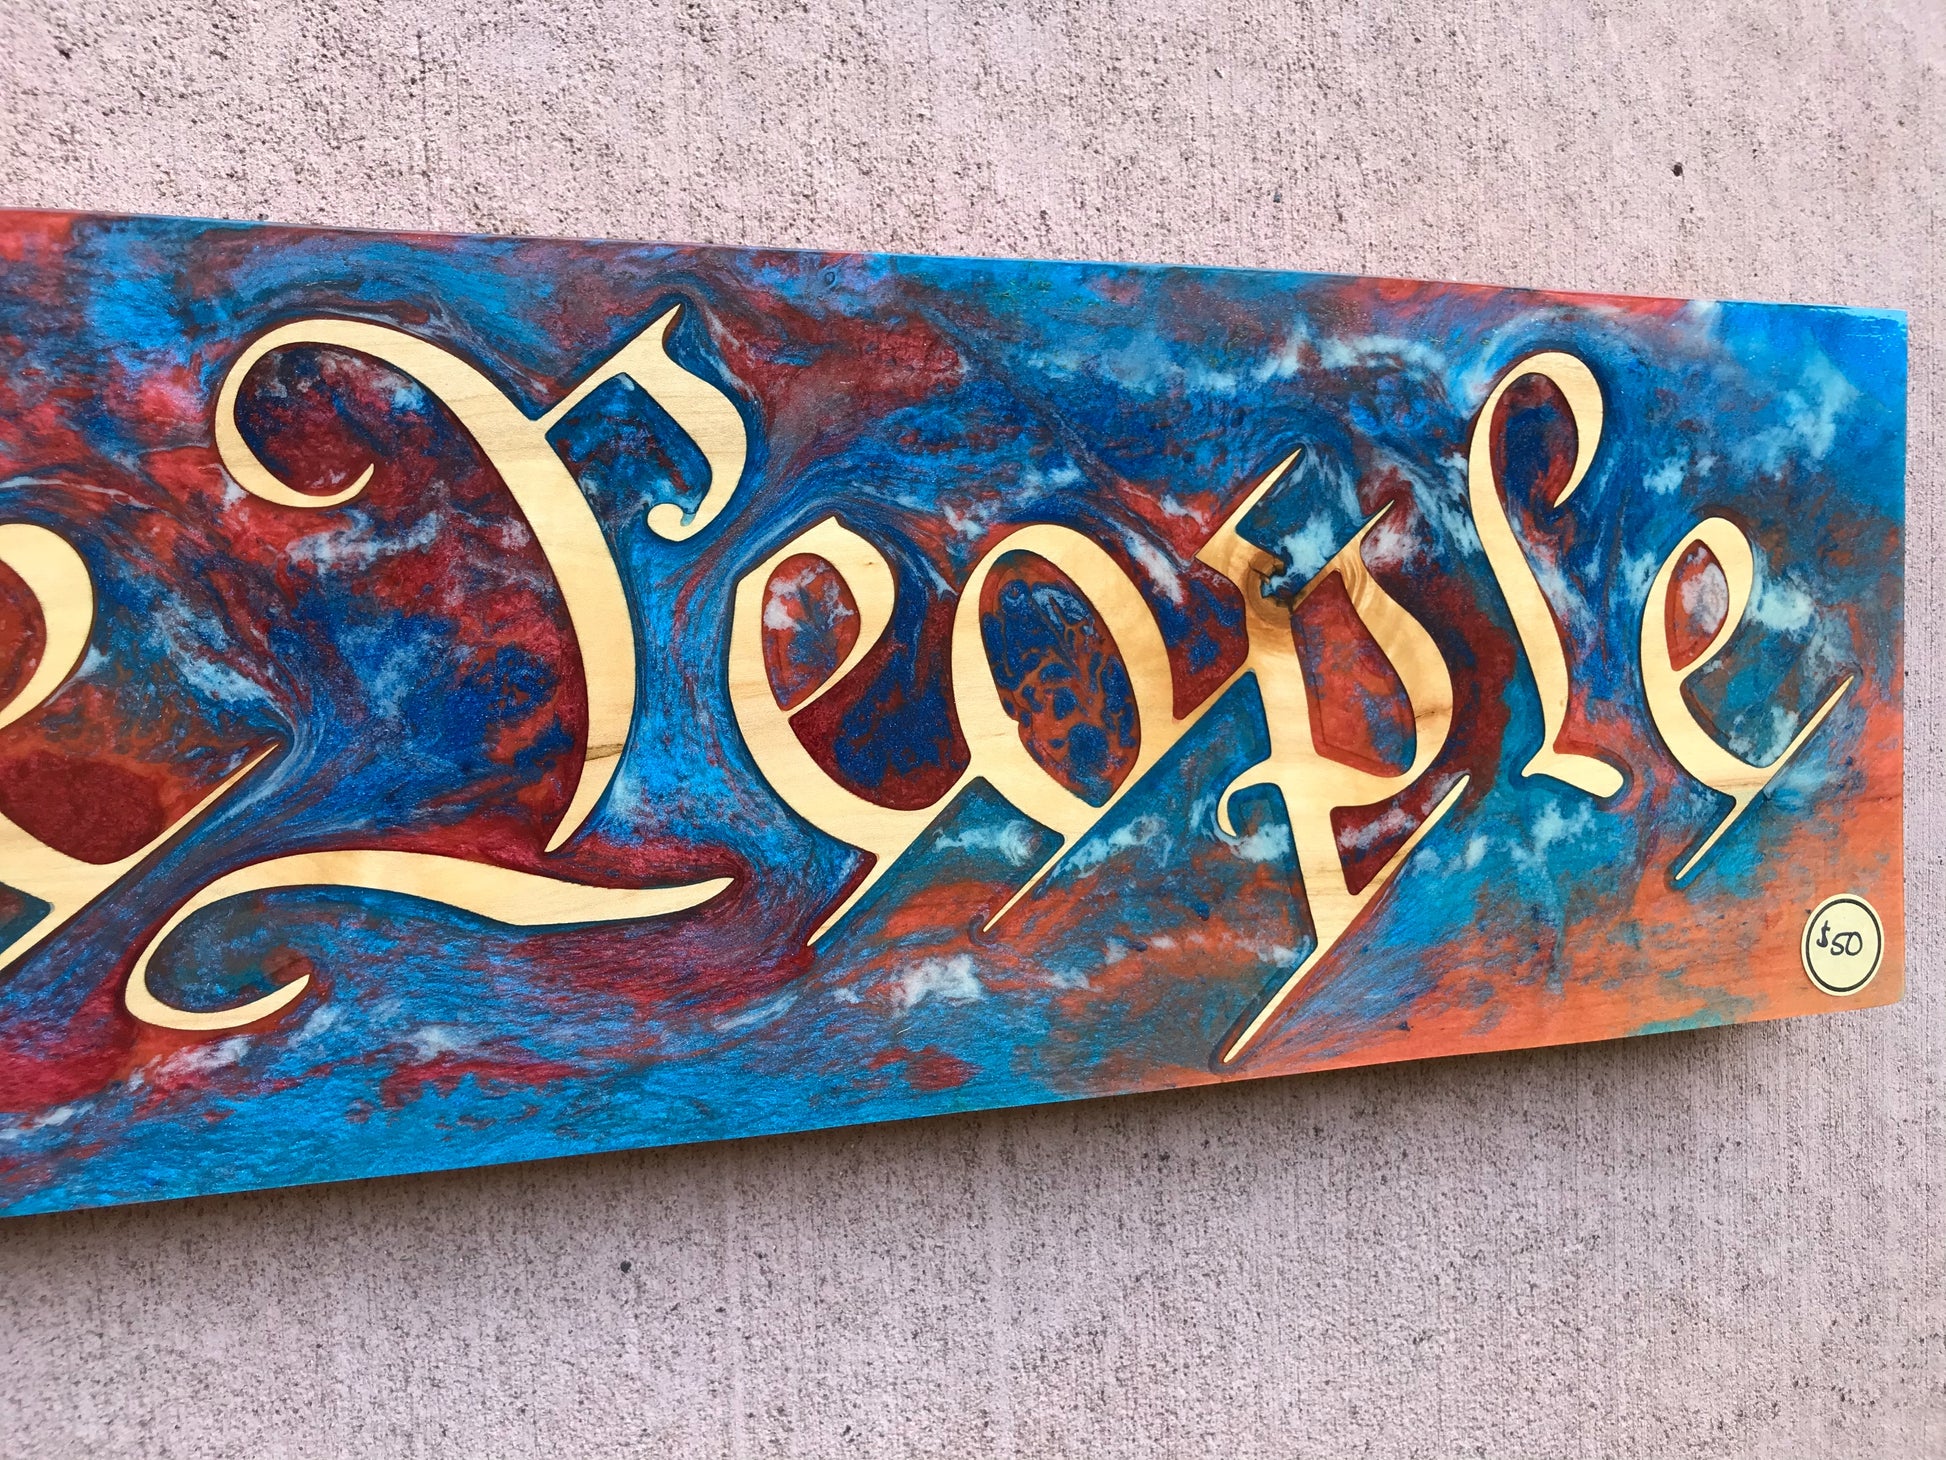 We the People - Thread & Resin